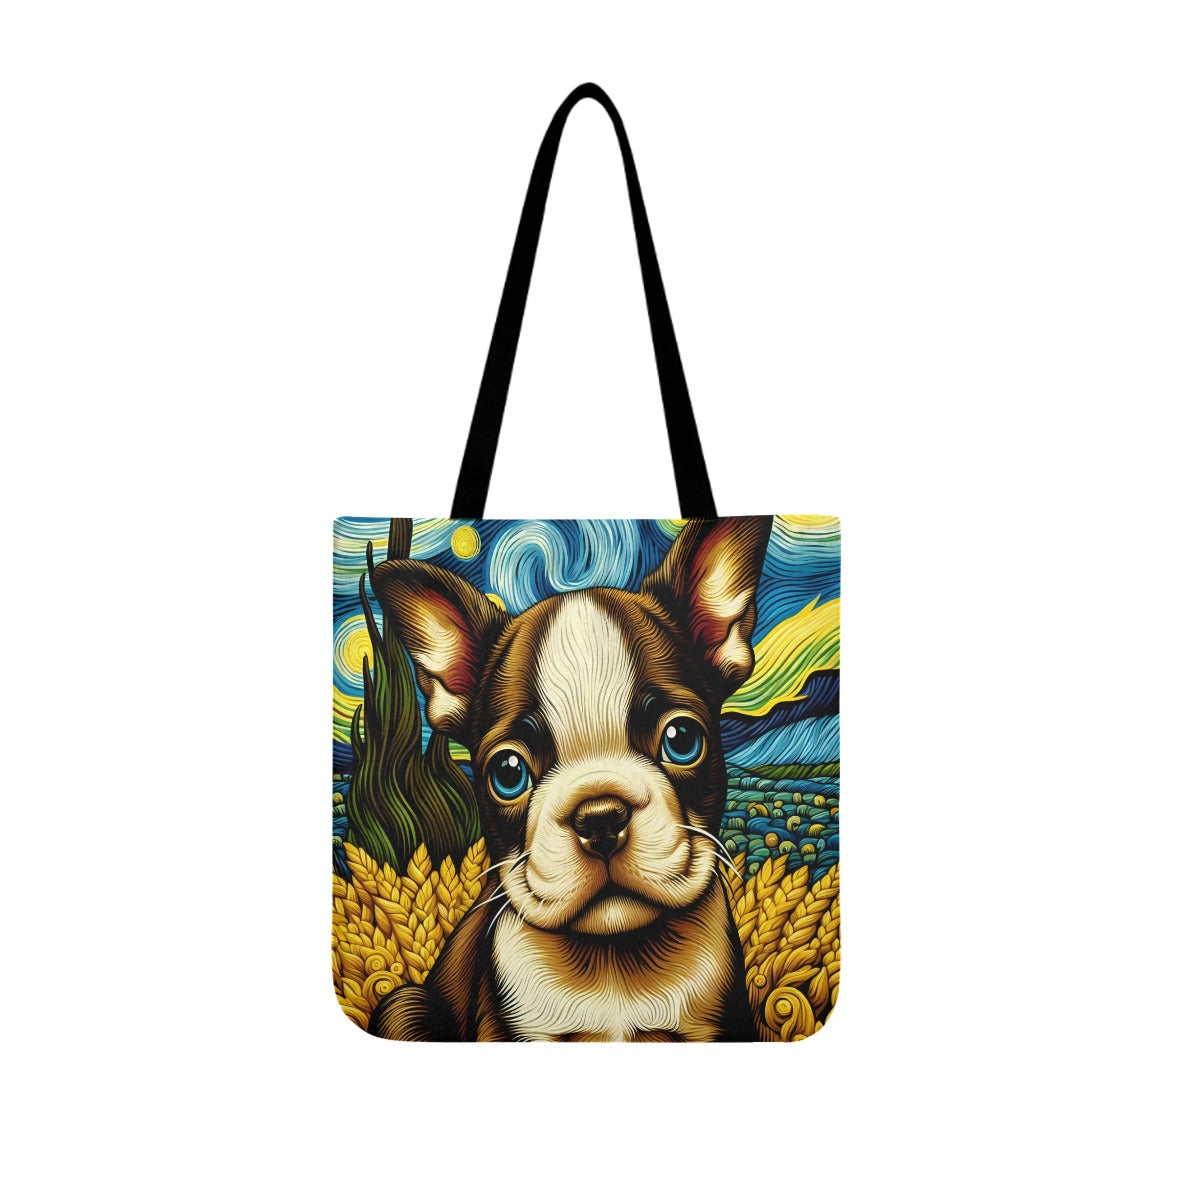 Milo - Cloth Tote Bags for Boston Terrier lovers